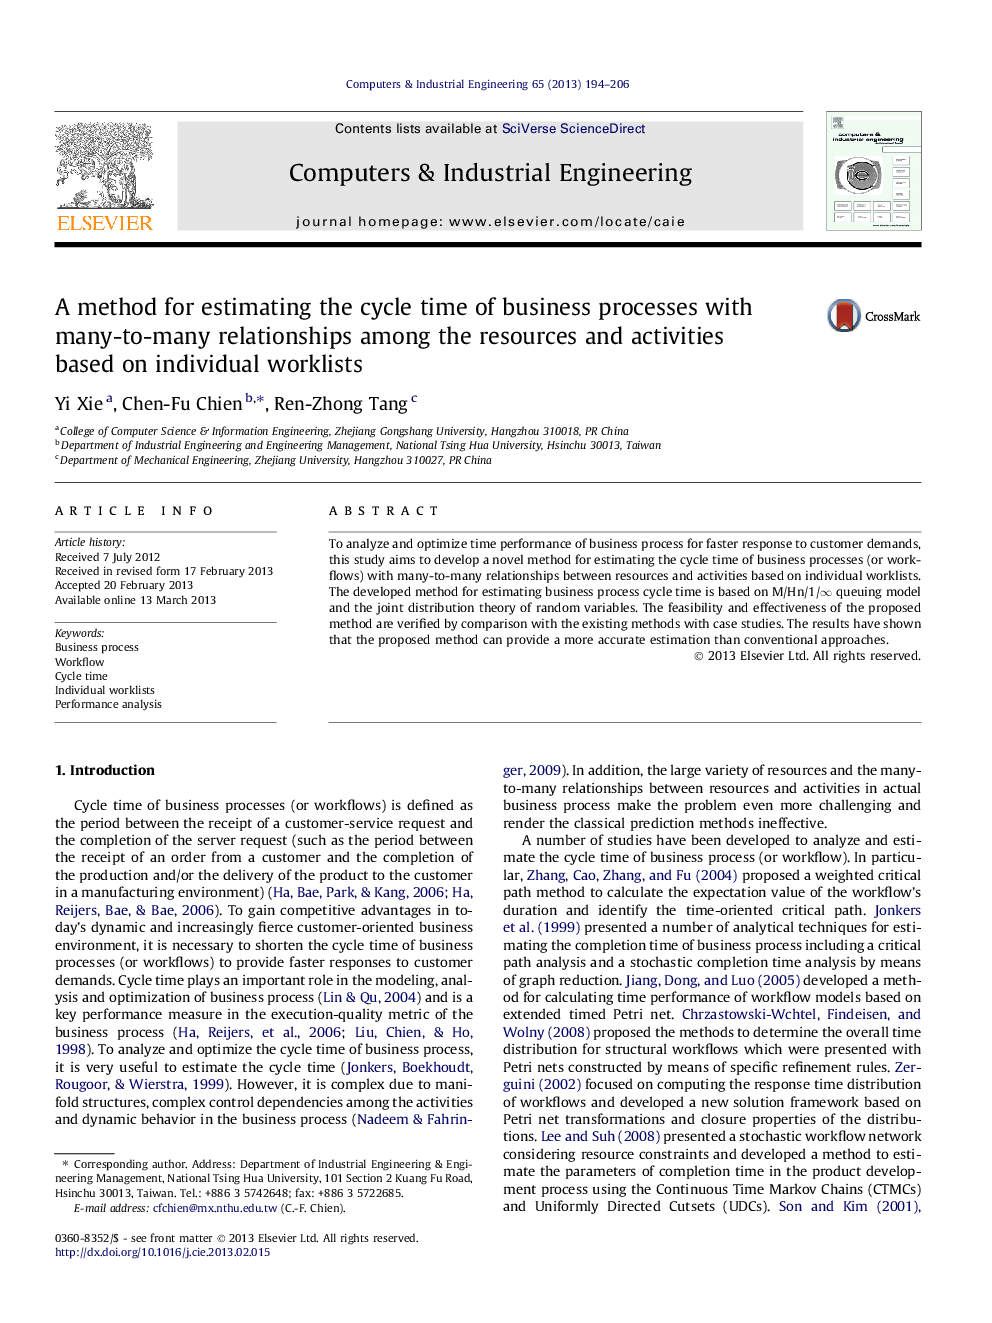 A method for estimating the cycle time of business processes with many-to-many relationships among the resources and activities based on individual worklists